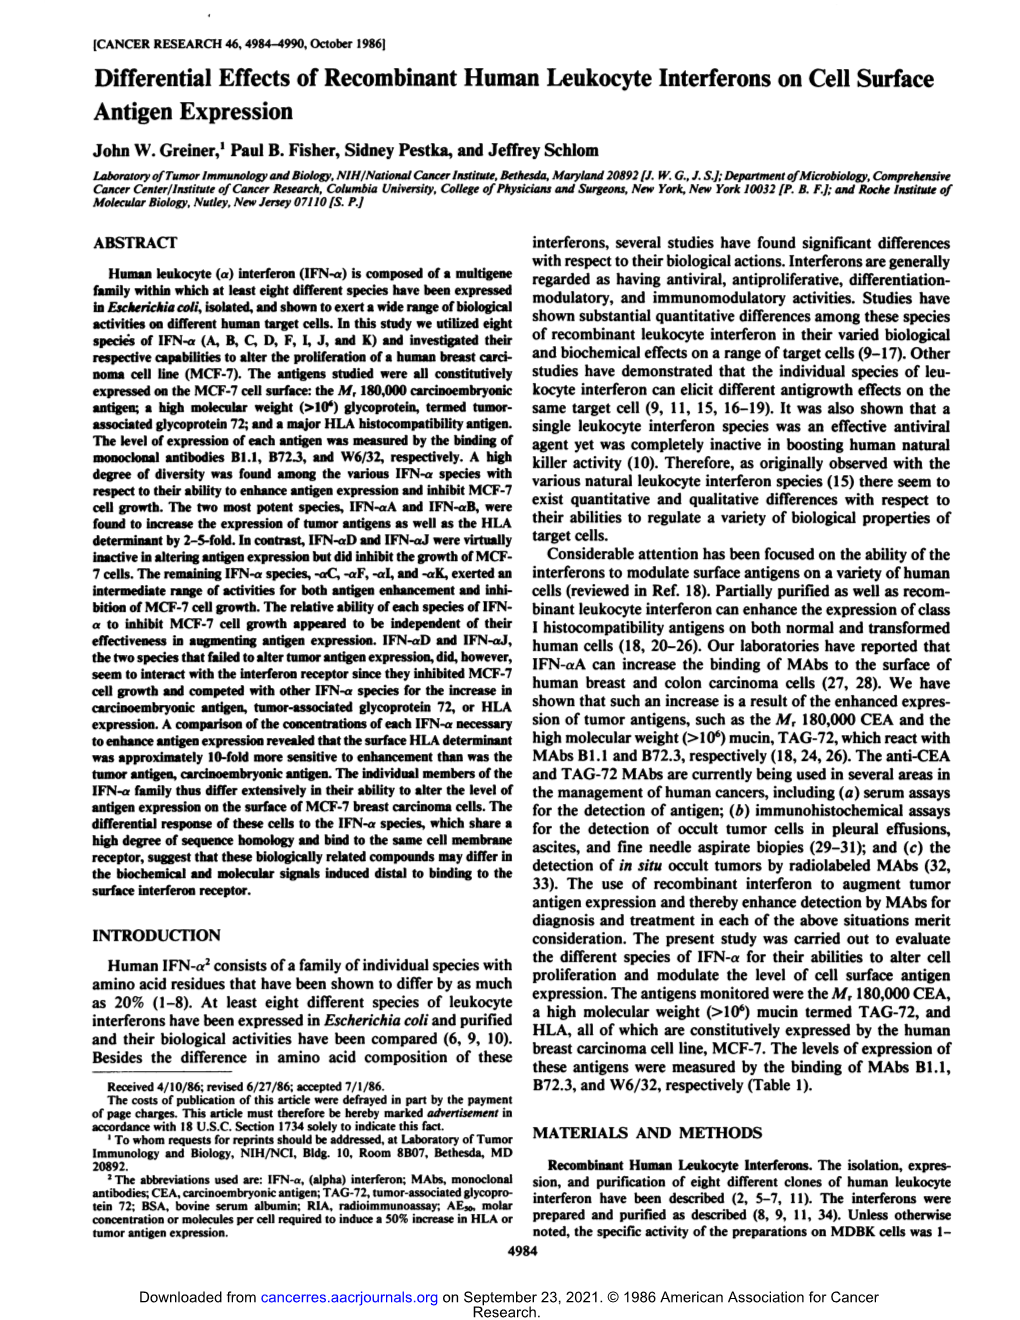 Differential Effects of Recombinant Human Leukocyte Interferons on Cell Surface Antigen Expression John W